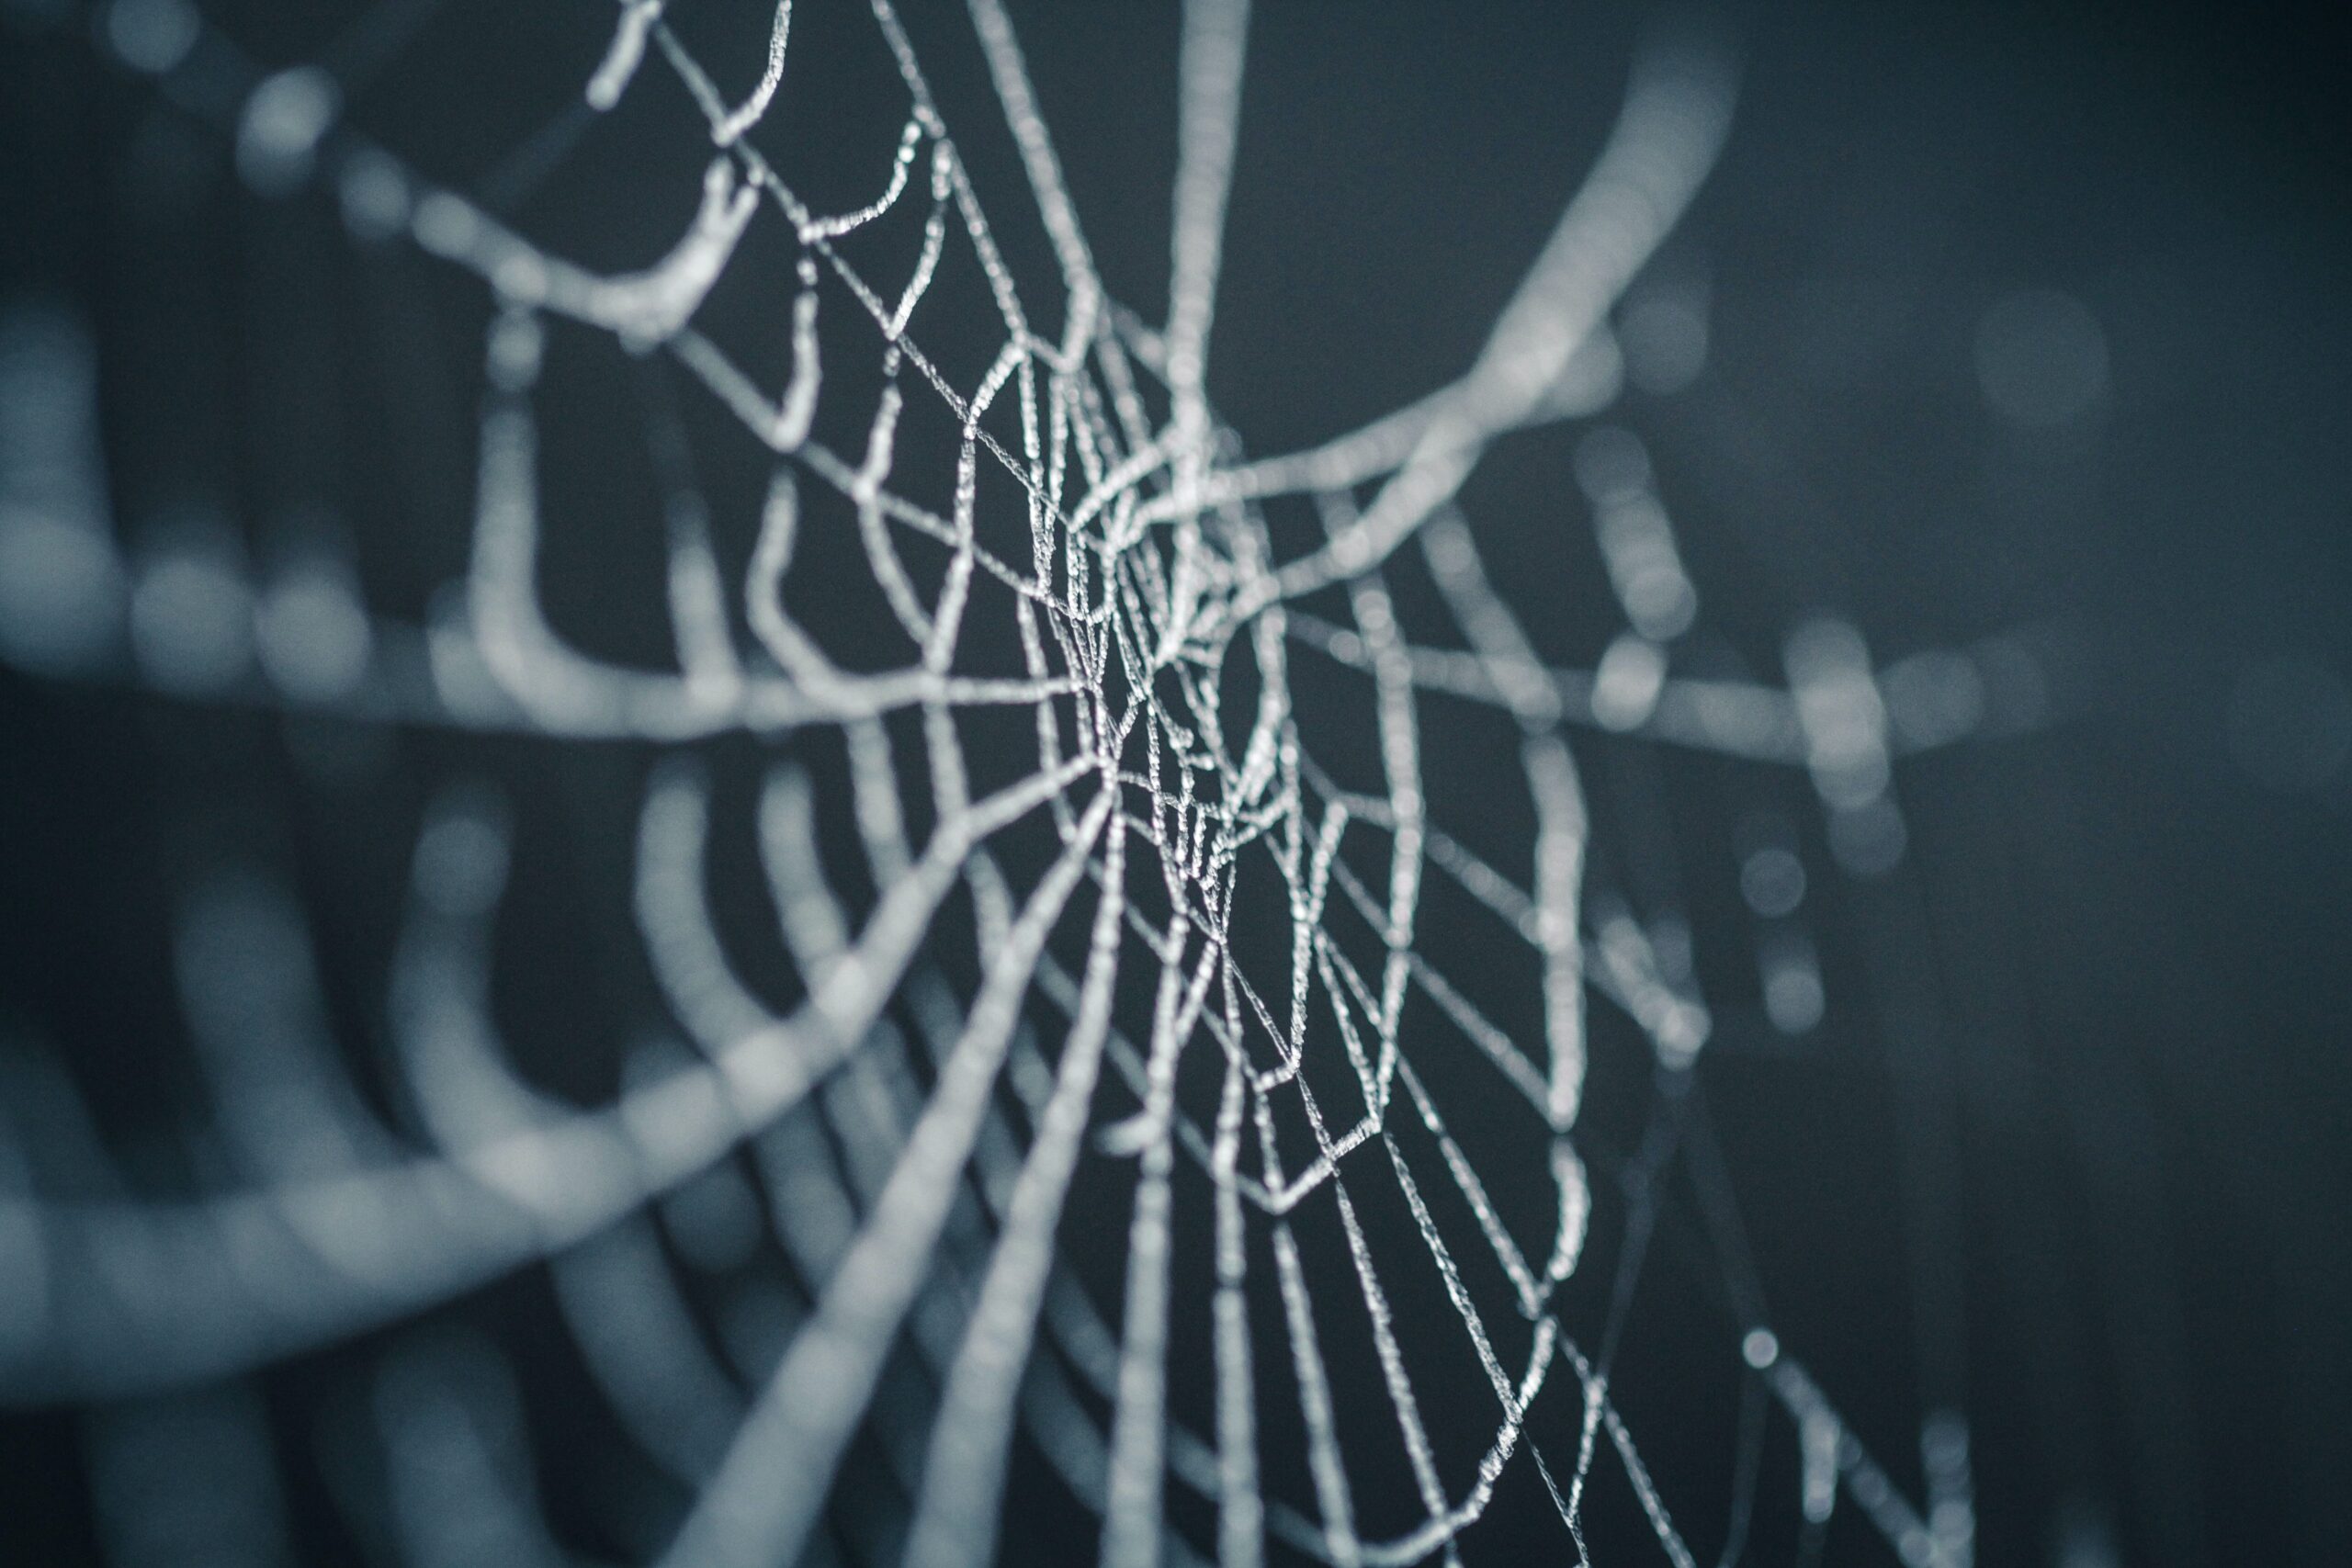 The web others weave